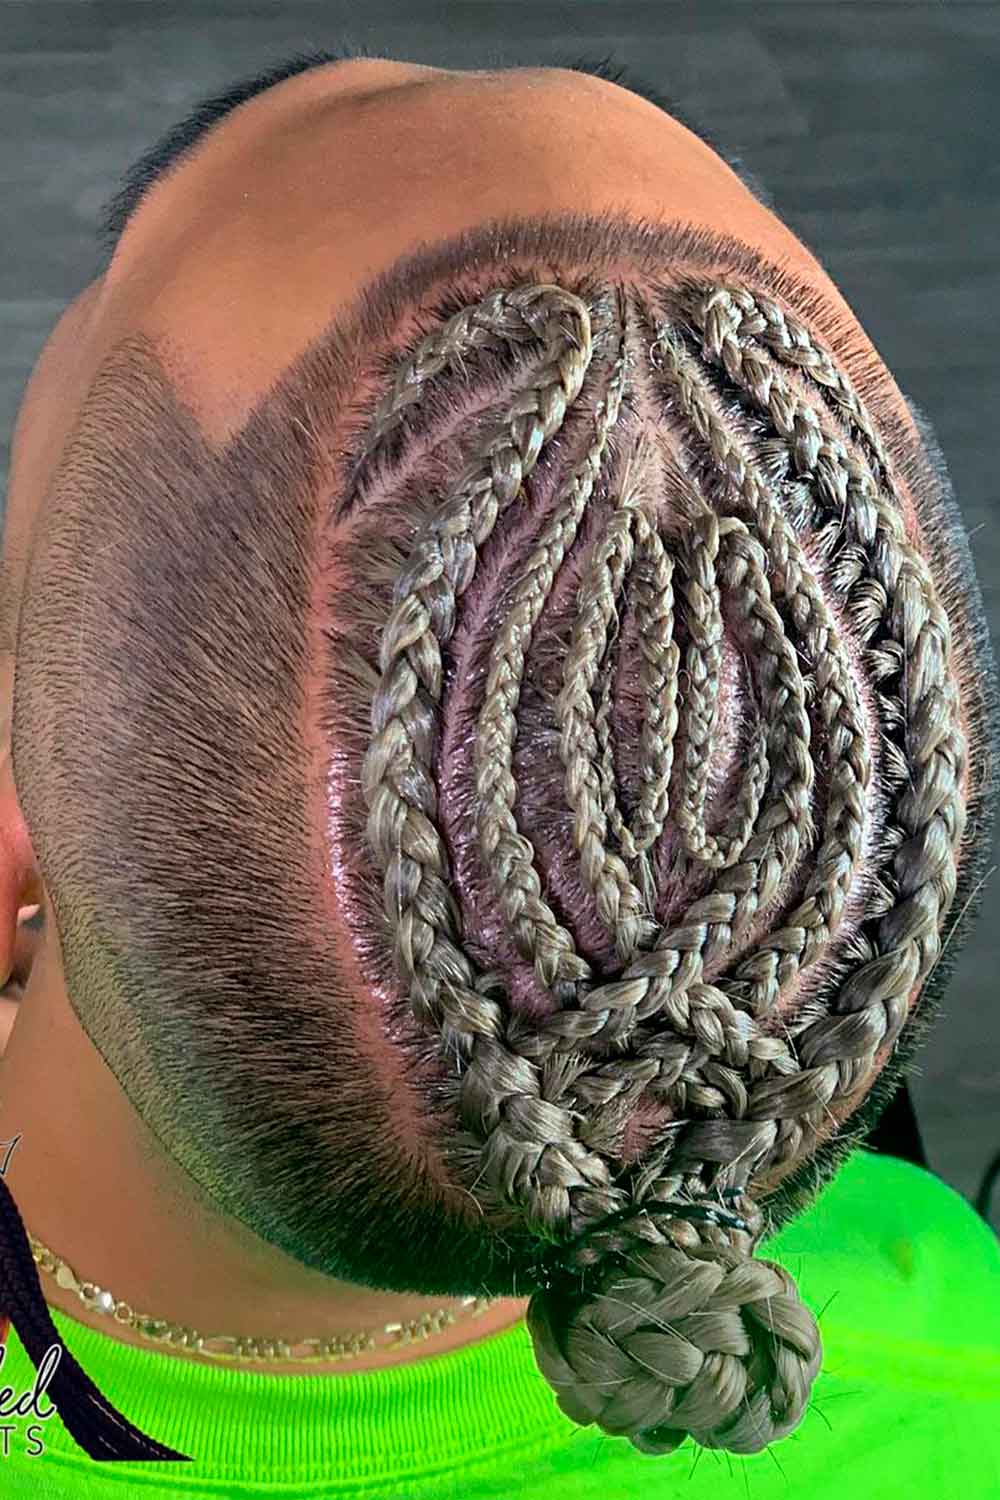 50 Viking Hairstyles That You Won't Find Anywhere Else | MensHaircuts